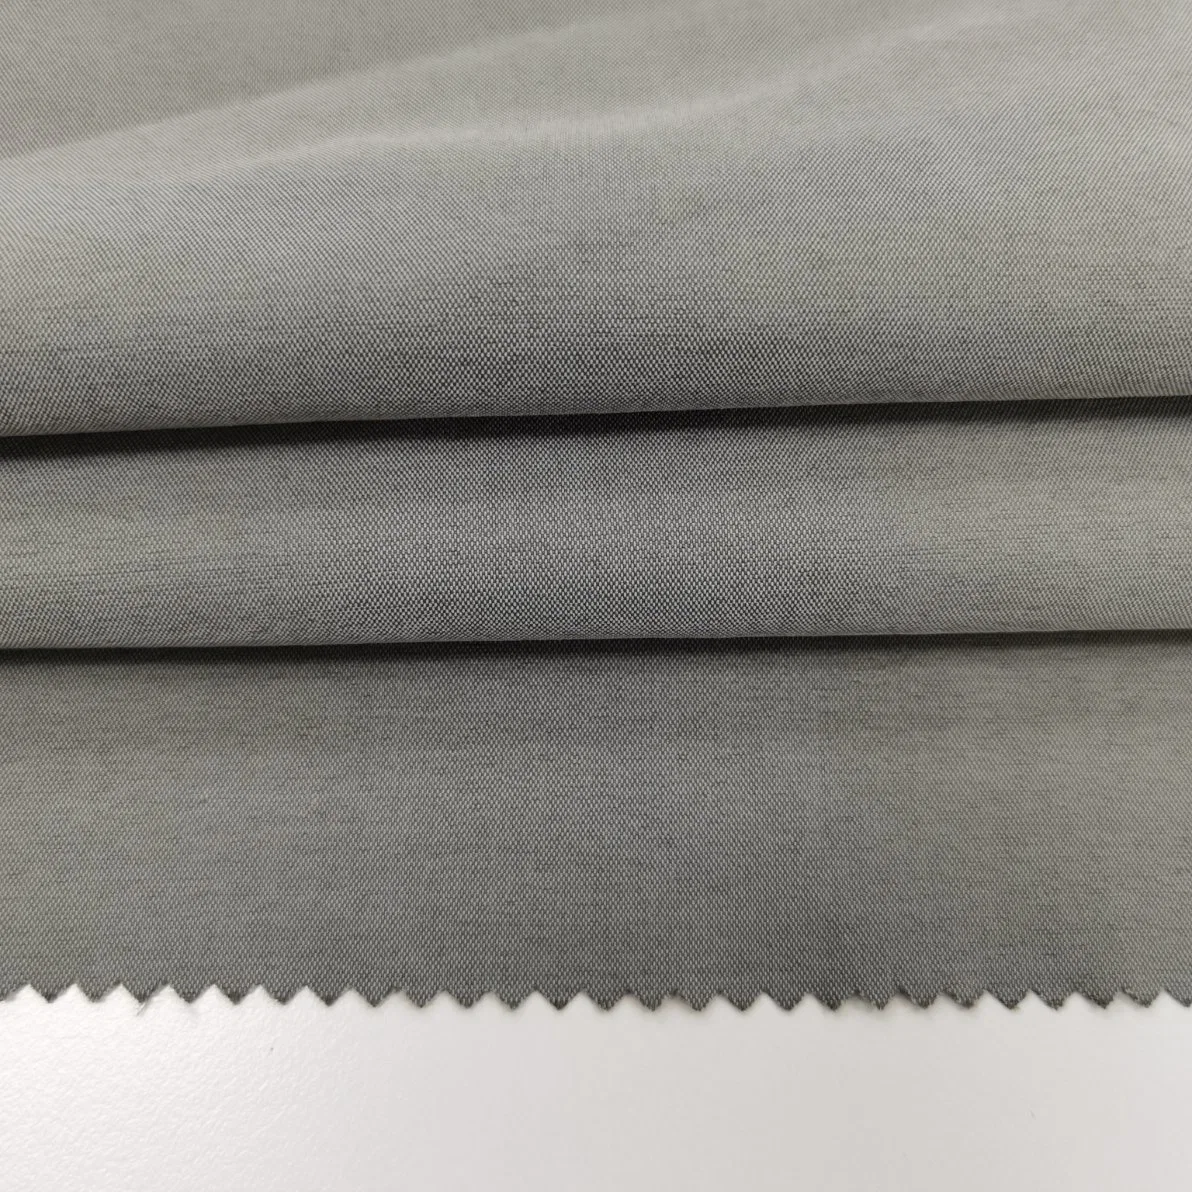 China Supplier Nylon Polyester Cation T800 Weft Elastic Dull Poly Fabric Functional Breathable Fabric for Sportswear